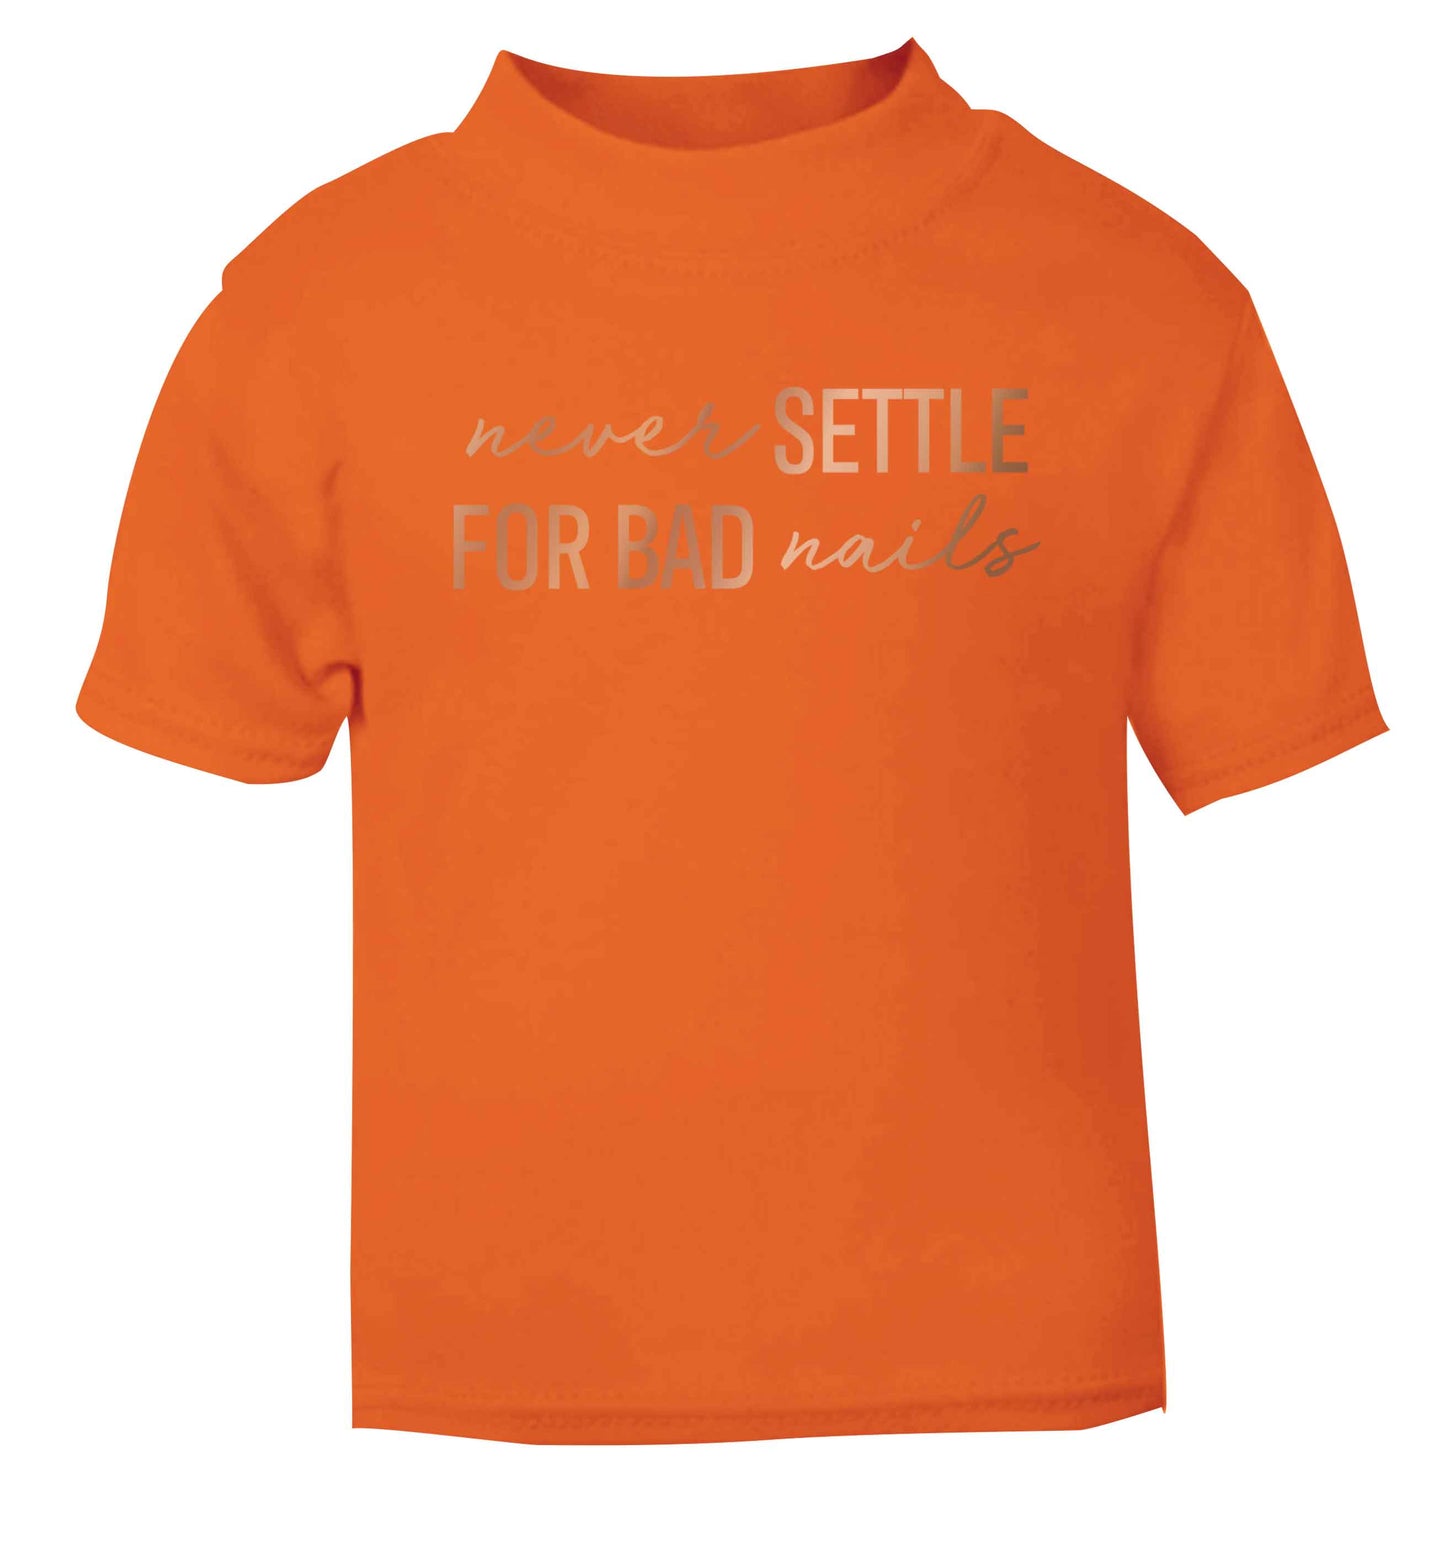 Never settle for bad nails - rose gold orange baby toddler Tshirt 2 Years